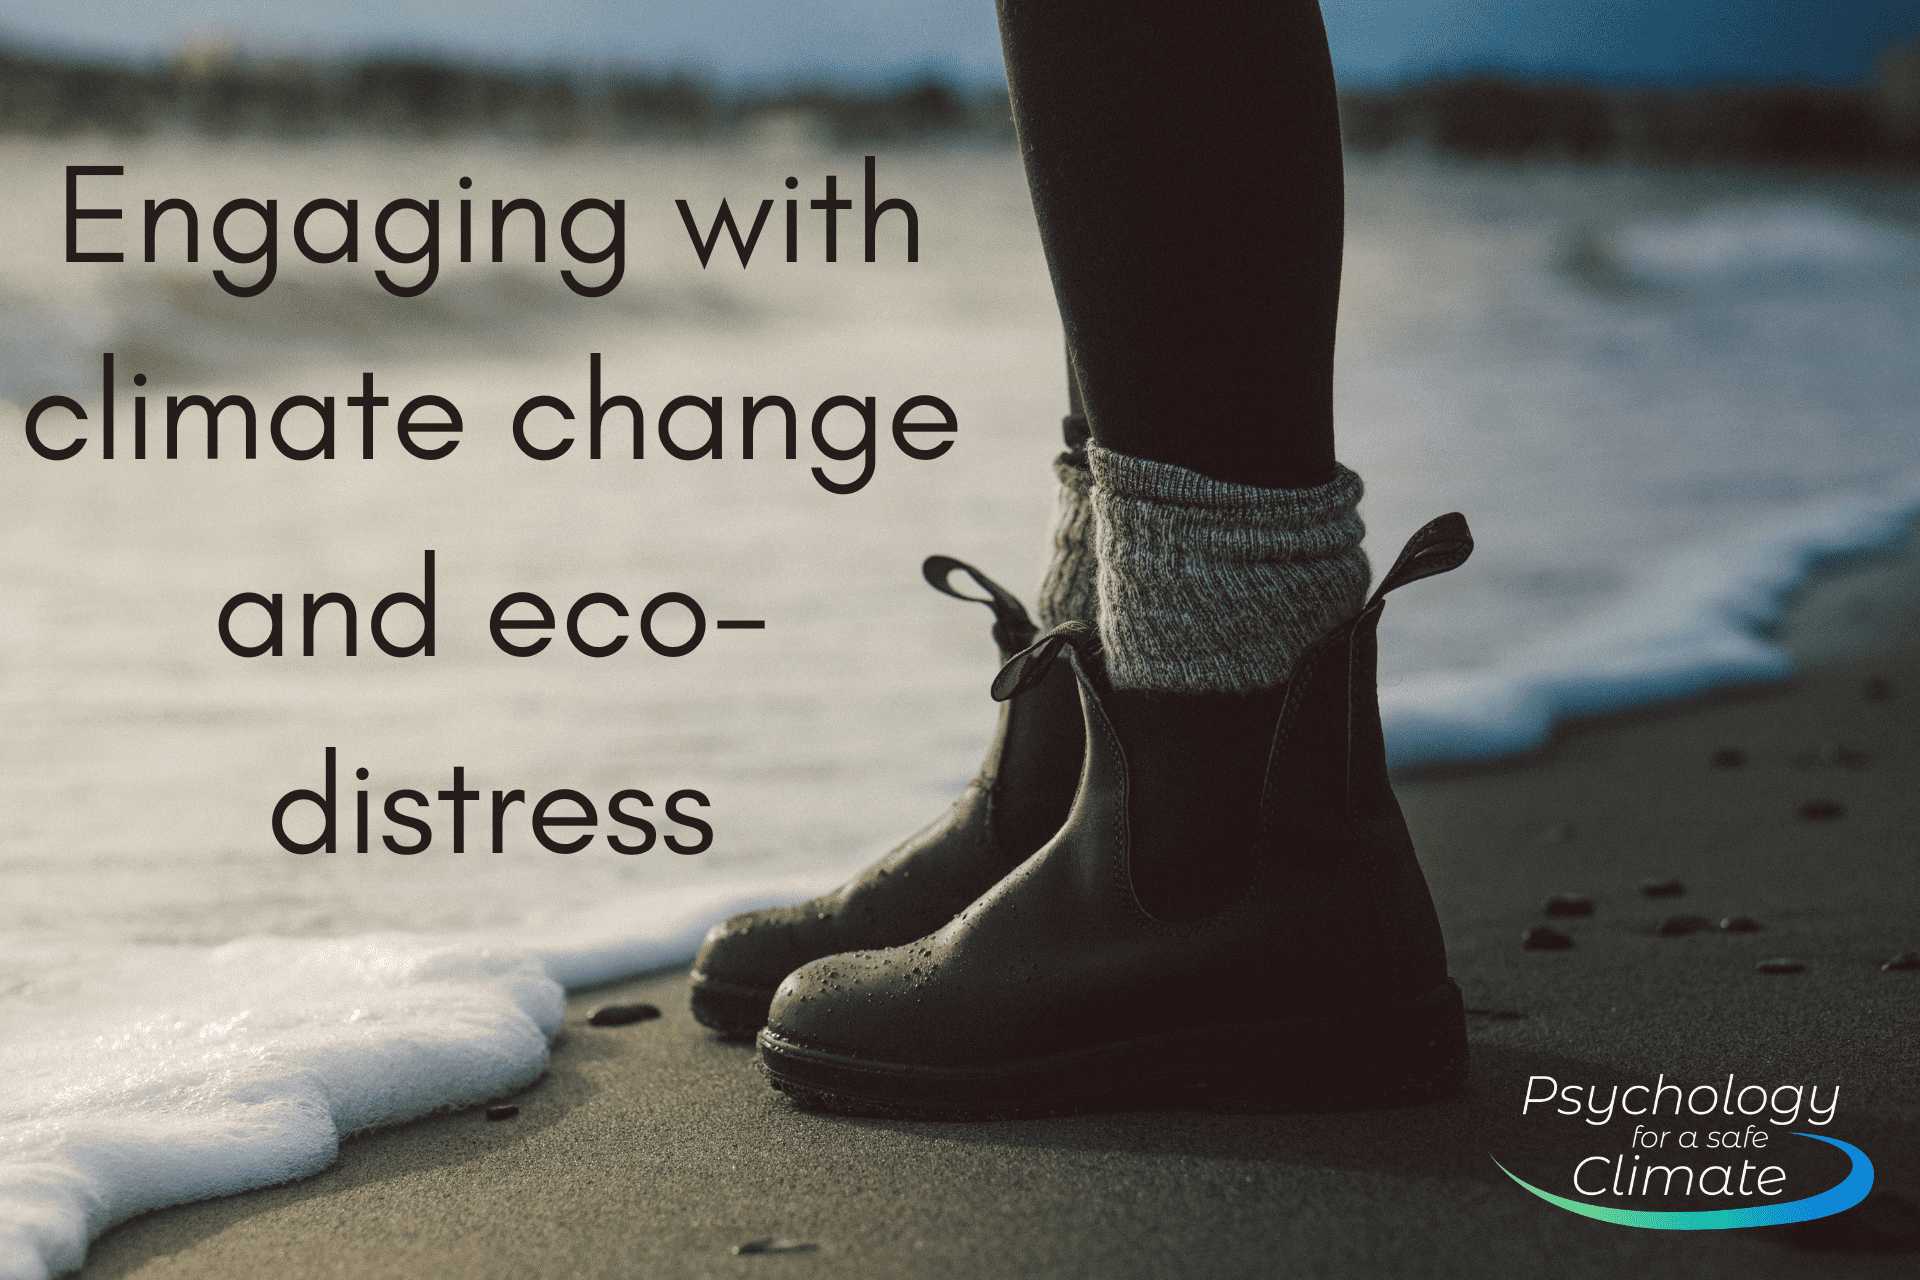 Engaging with climate change and eco-distress